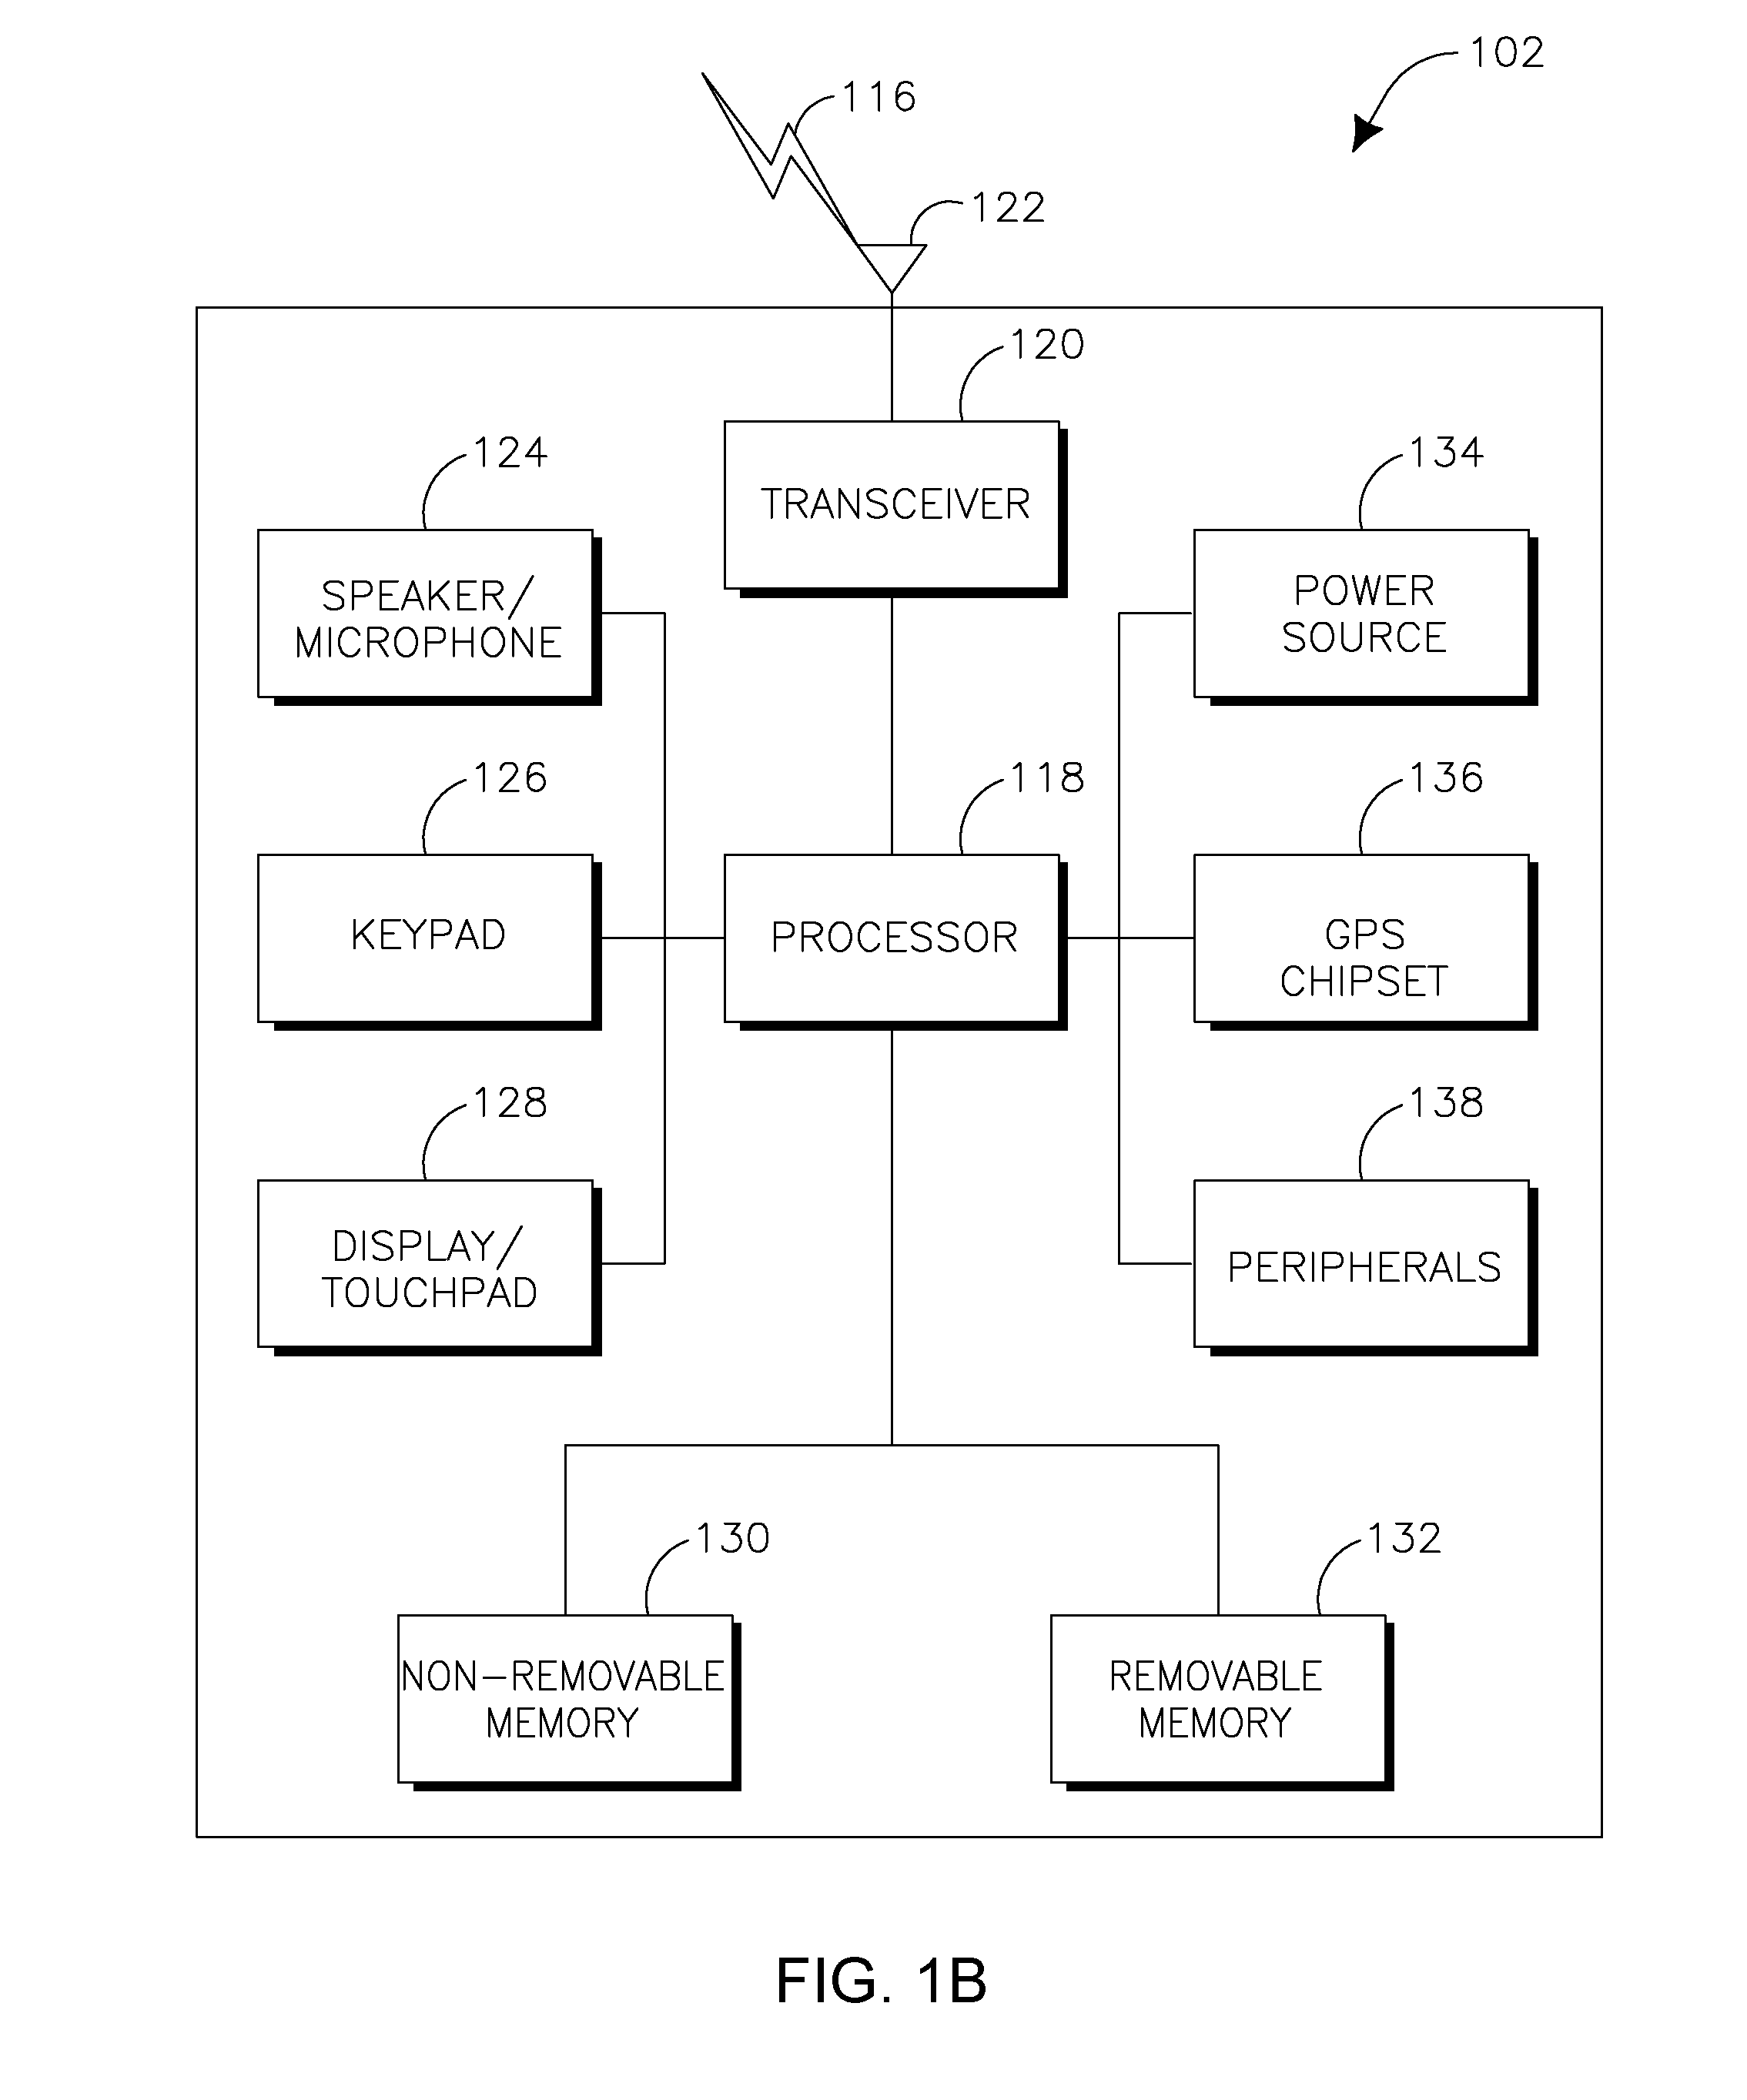 Method and apparatus for minimizing interference at a mobile station using a shared node